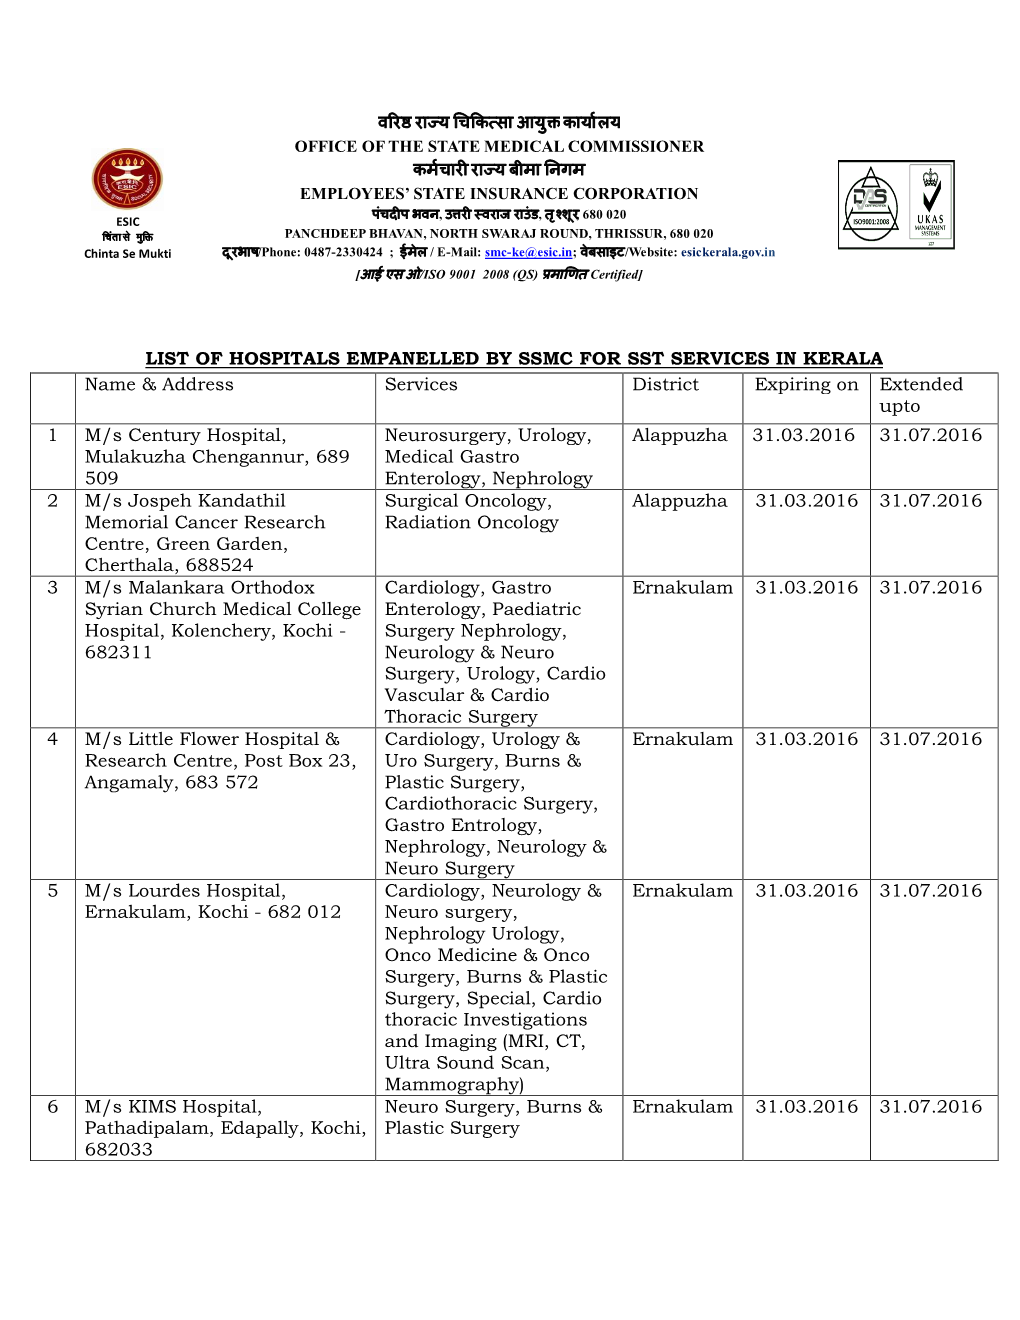 List of Hospitals Empanelled by Ssmc for Sst Services In